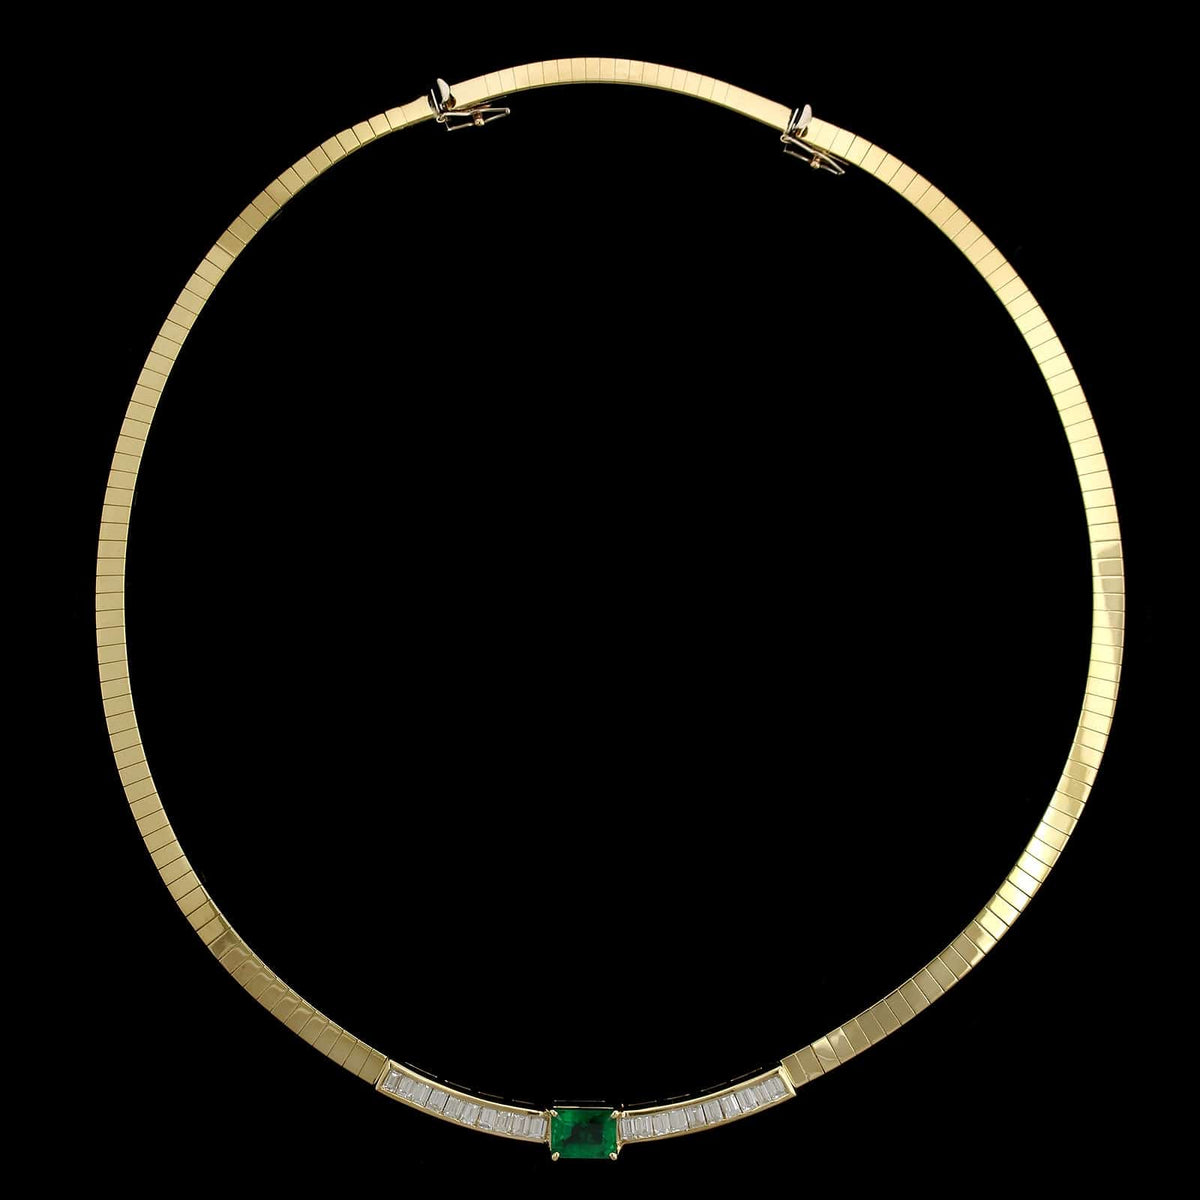 Suggestions for 14k or 18k gold necklace extender (Tiffany)? : r/jewelry